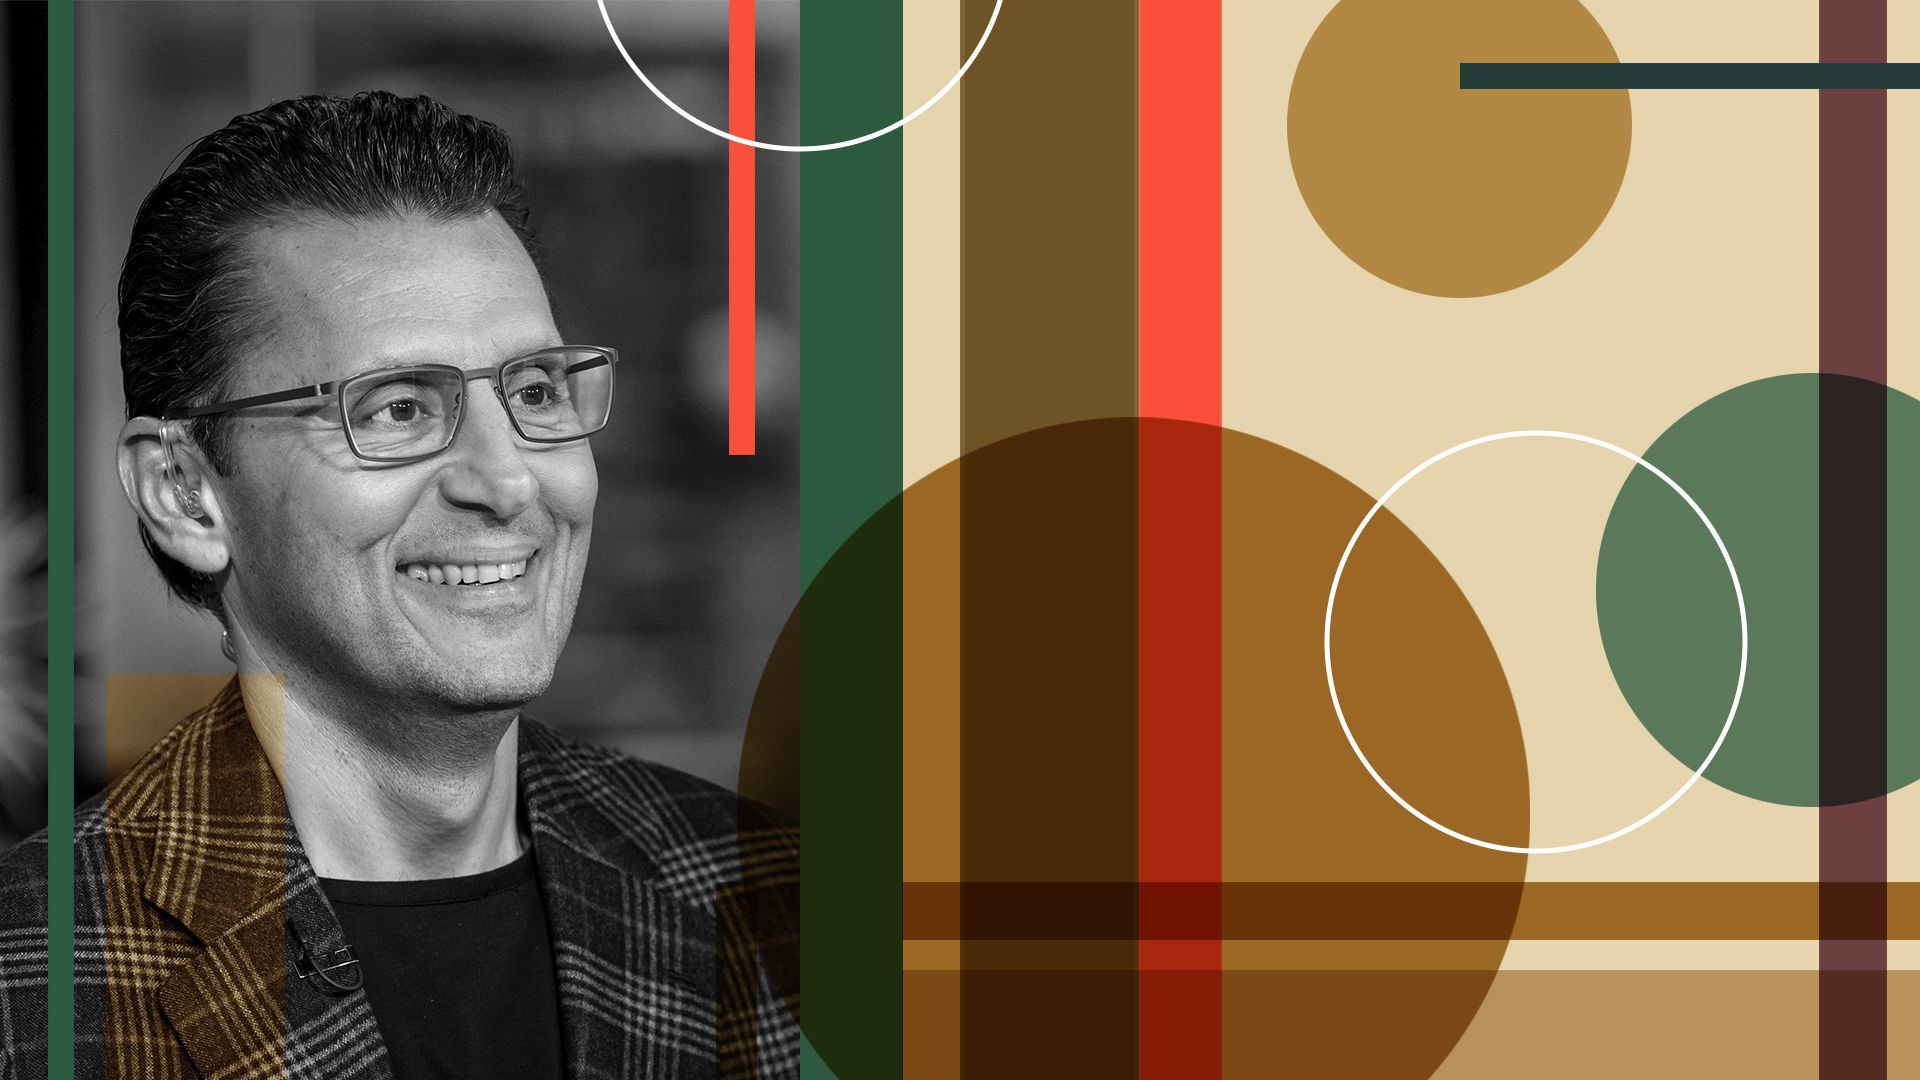 Photo illustration of Intuit's CEO, Sasan Goodarzi, with abstract shapes.